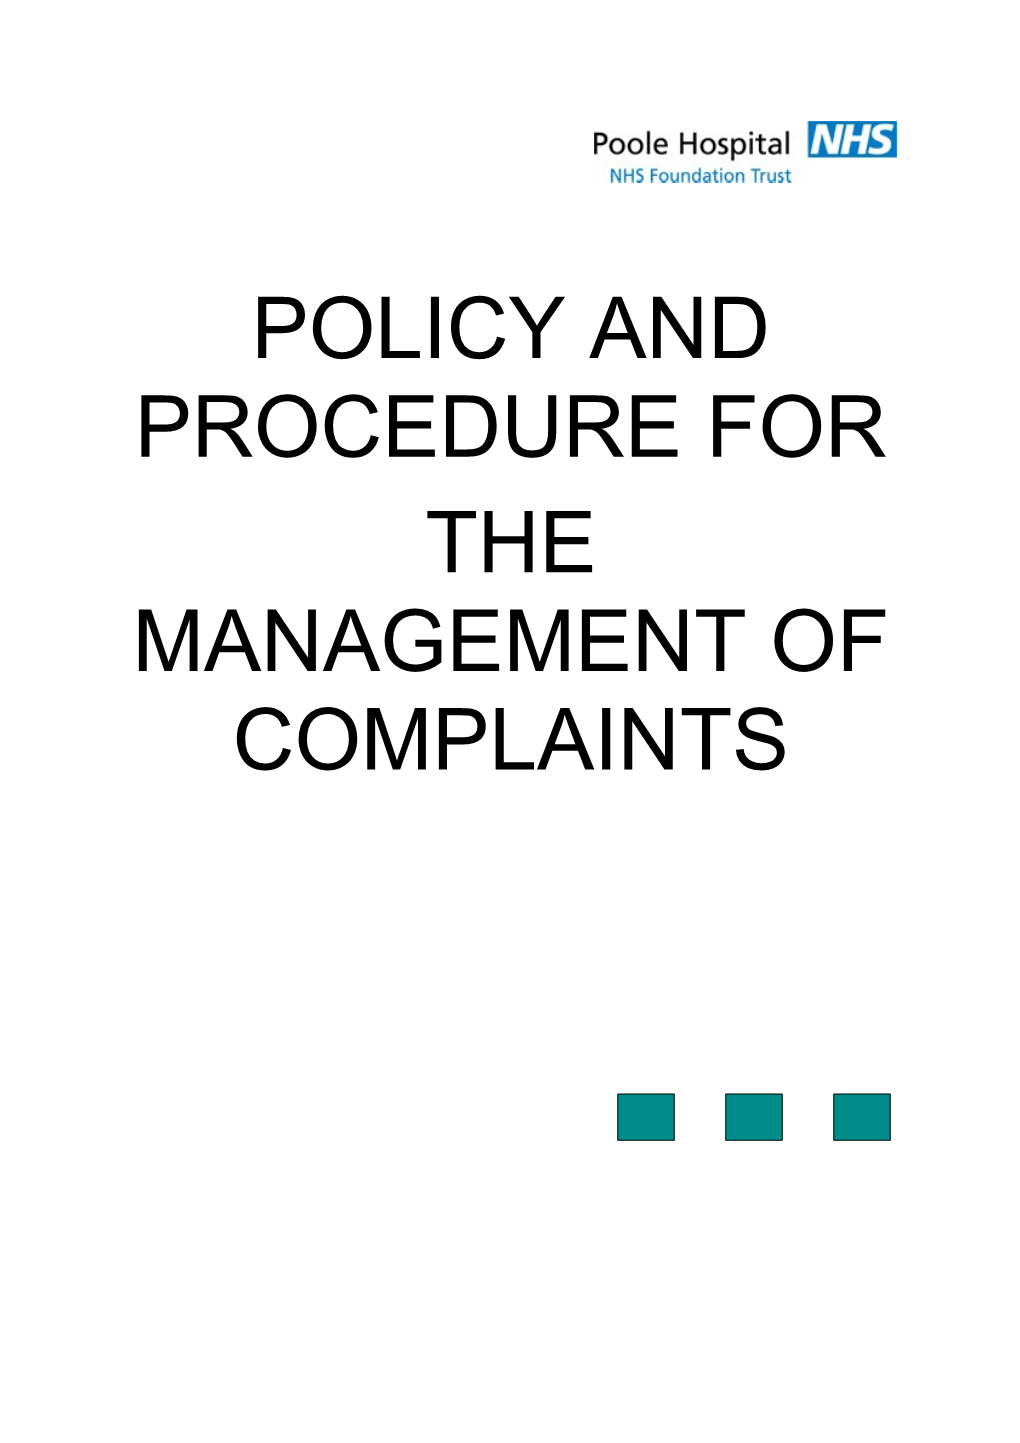 Policy and Procedure for The